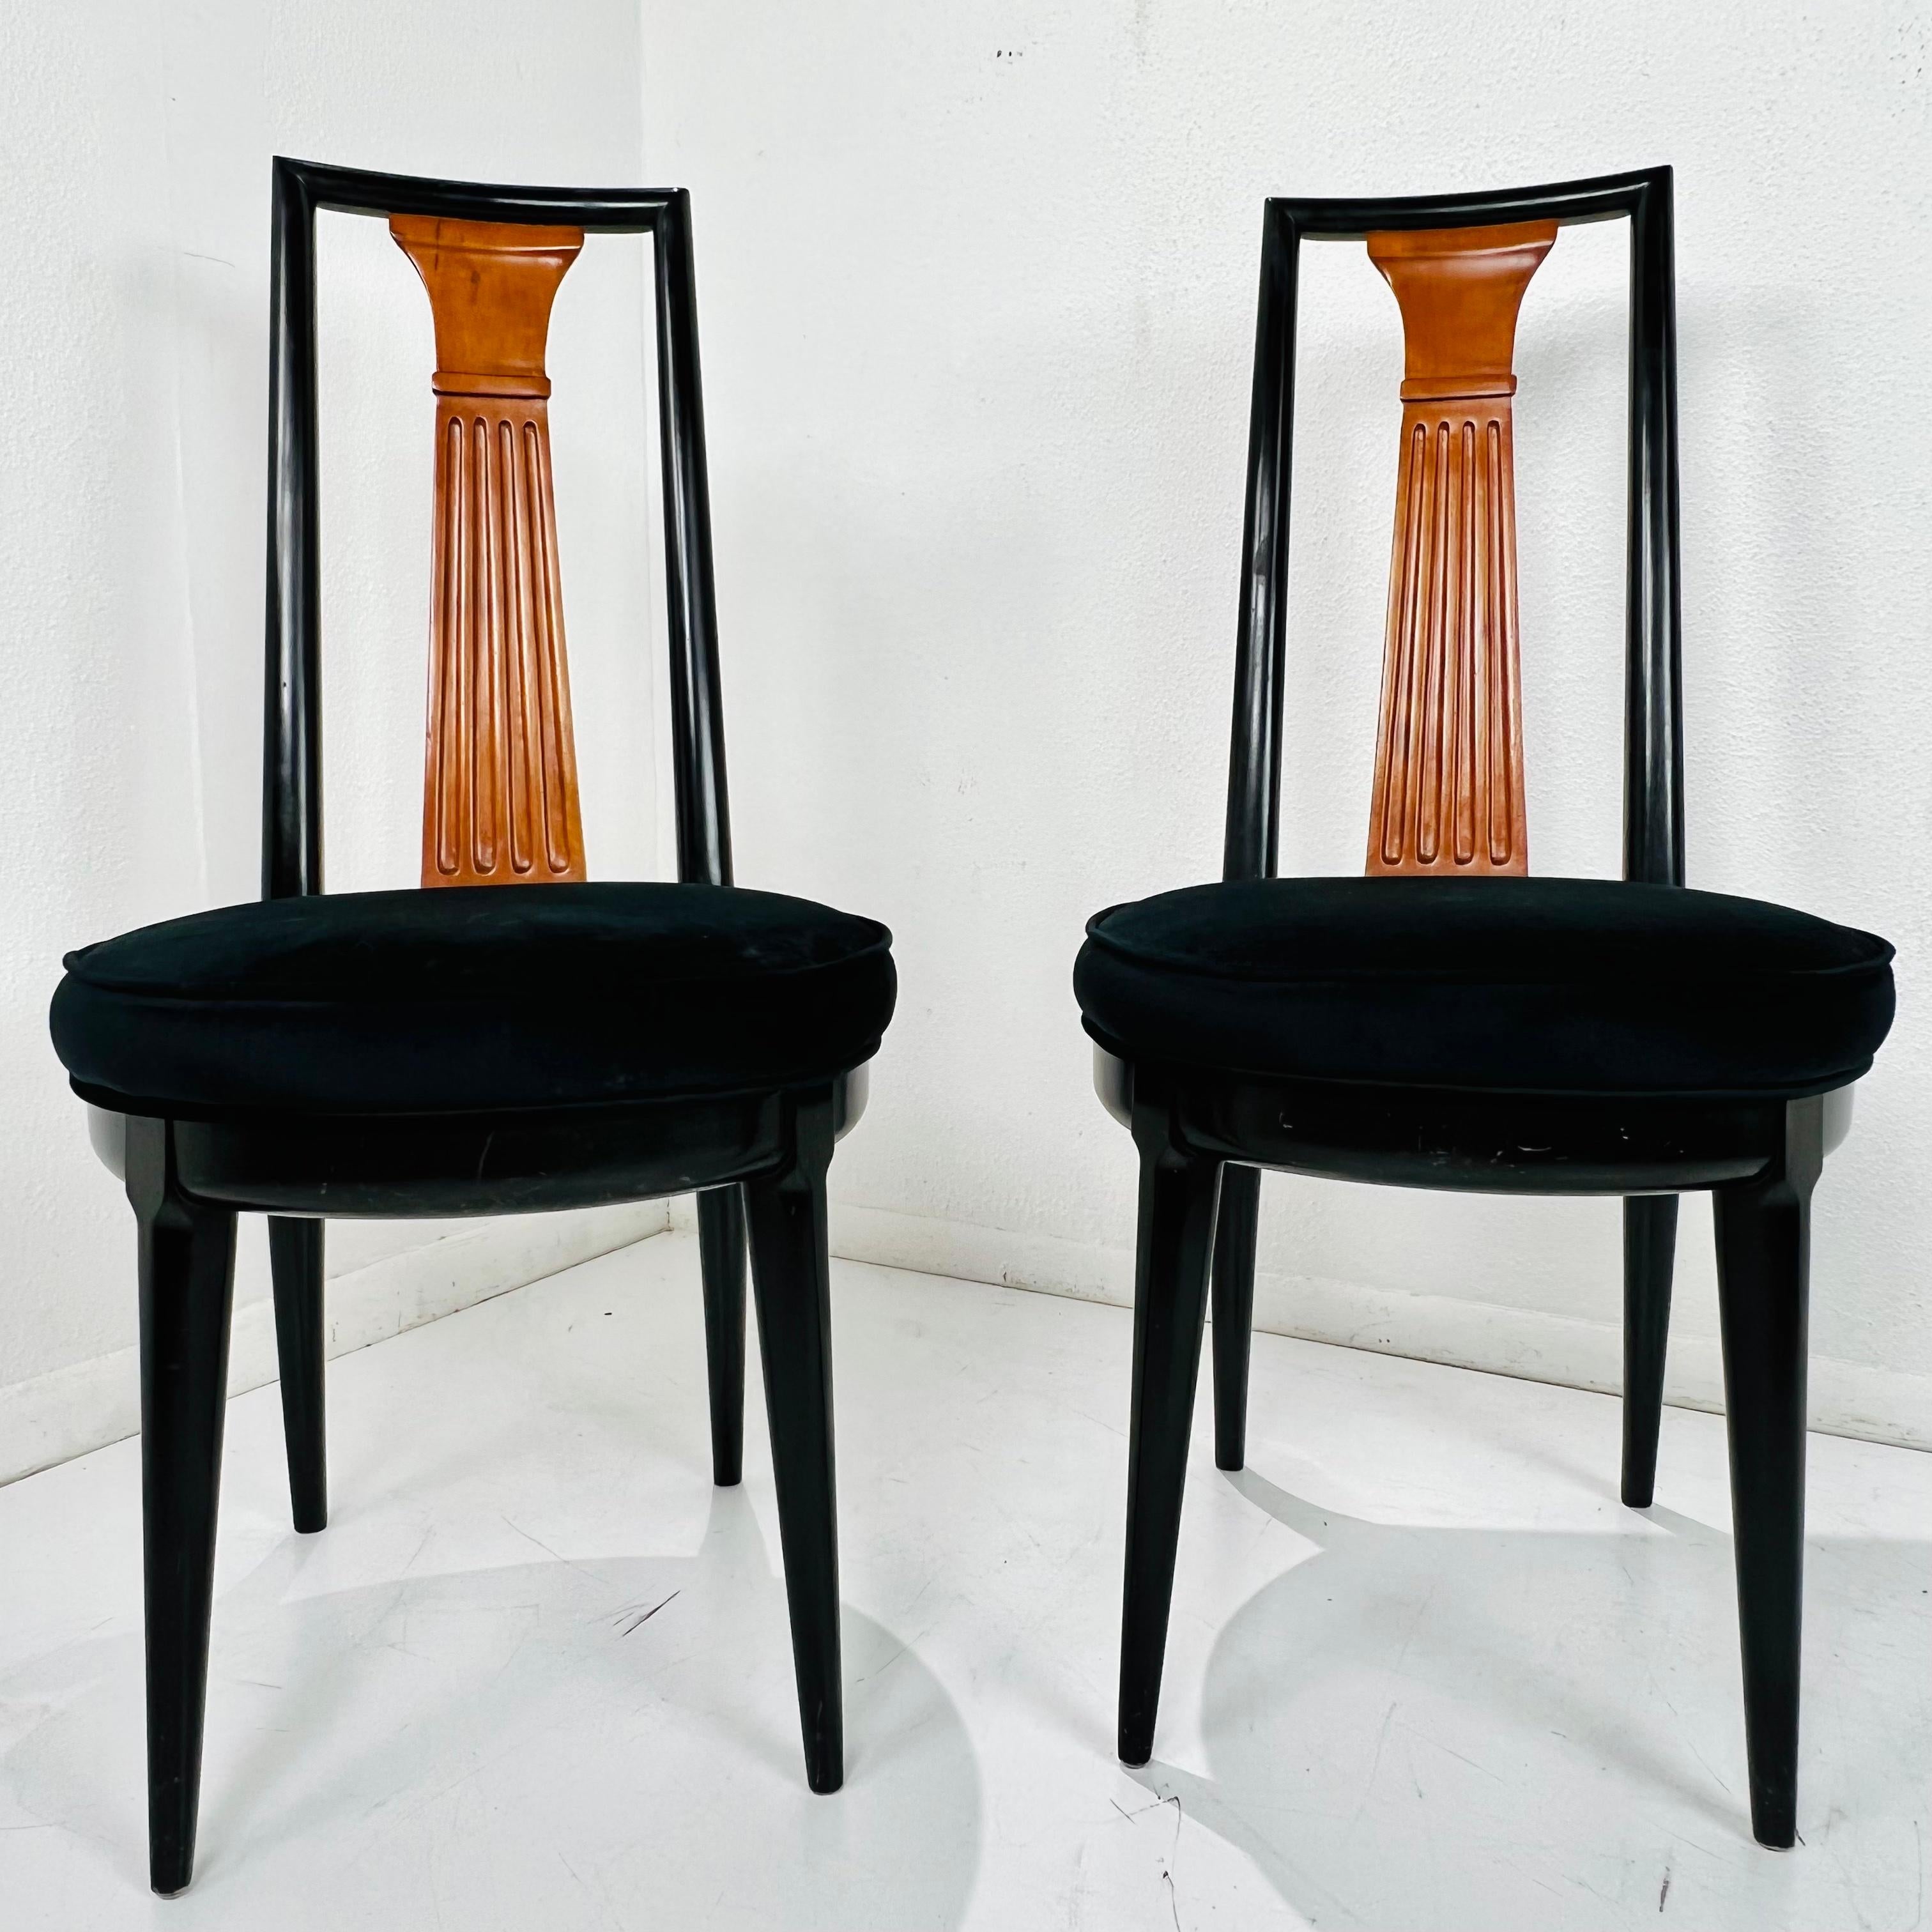 These beautiful and rare Tomlinson Furniture highback model #63 side chairs from their “Sophisticate Collection” are a distinctive, graceful interpretation of their time. Made from solid Pecan wood, these chairs have a sleek, tall back rest and